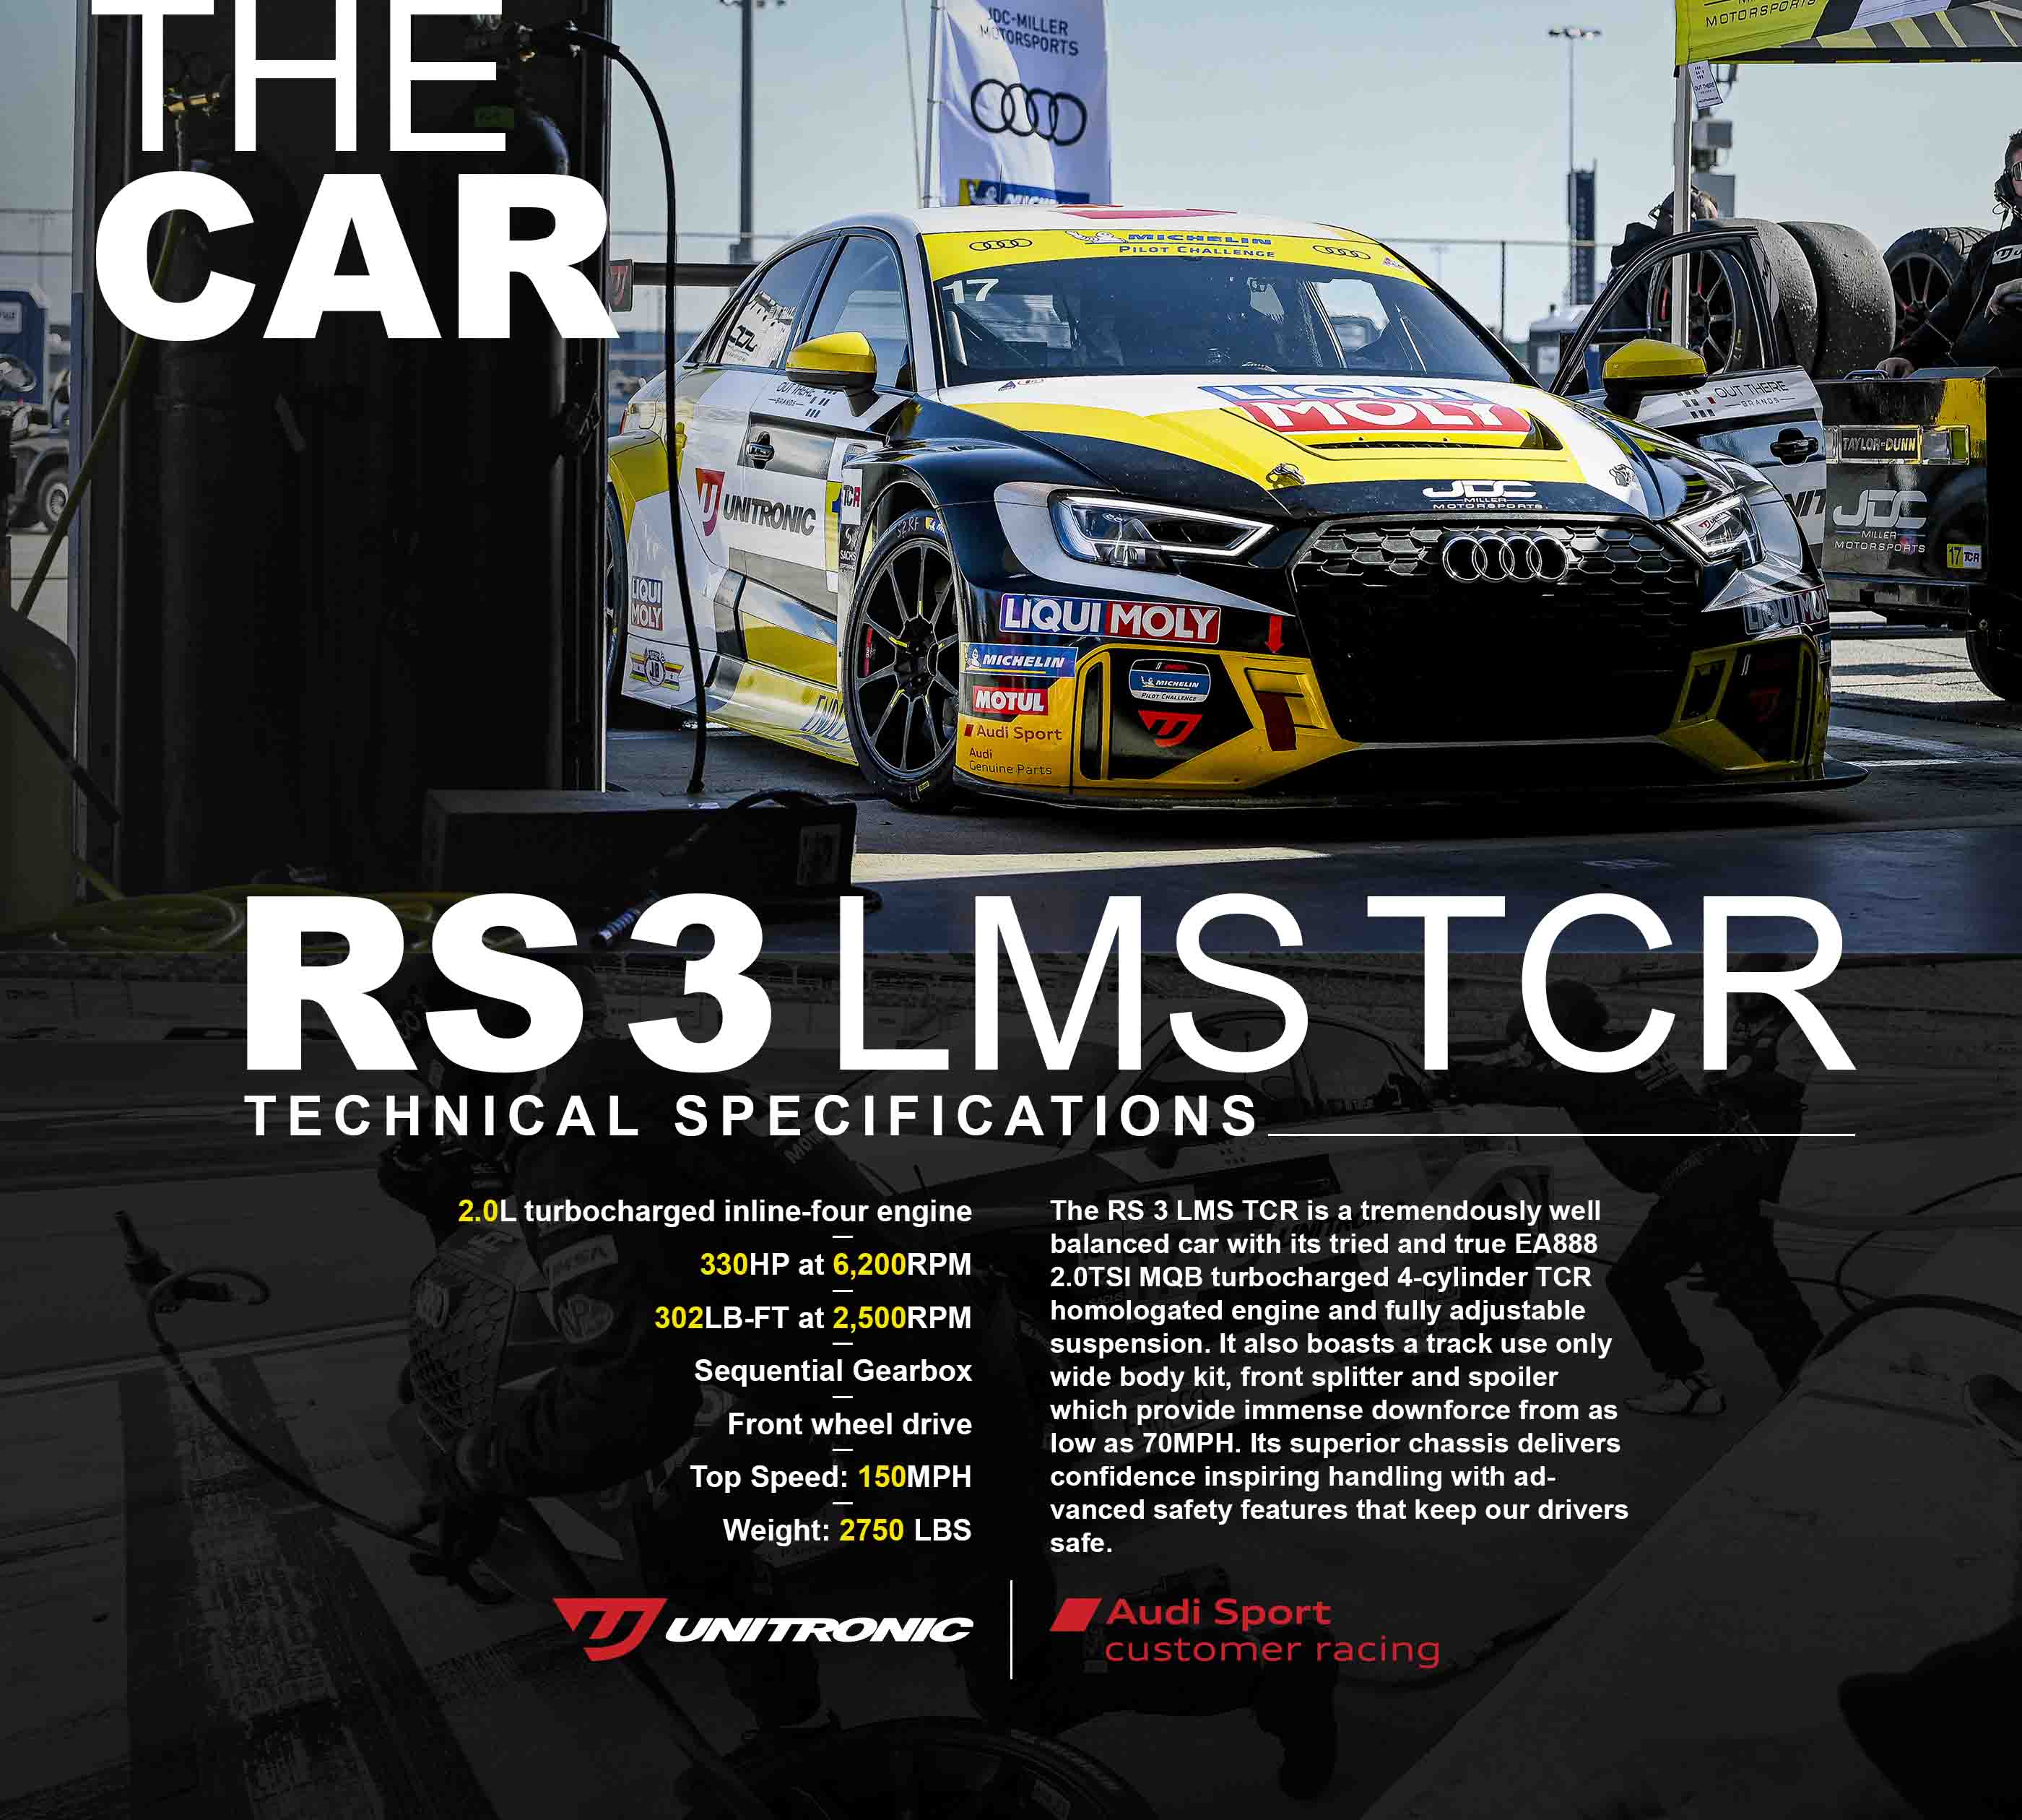 The RS 3 LMS TCR is a tremendously well balanced car with its tried and true EA888 2.0TSI MQB turbocharged 4-cylinder TCR homologated engine and fully adjustable suspension. It also boasts a track use only wide body kit, front splitter and spoiler which provide immense downforce from as low as 70MPH. Its superior chassis delivers confidence inspiring handling with advanced safety features that keep our drivers safe.